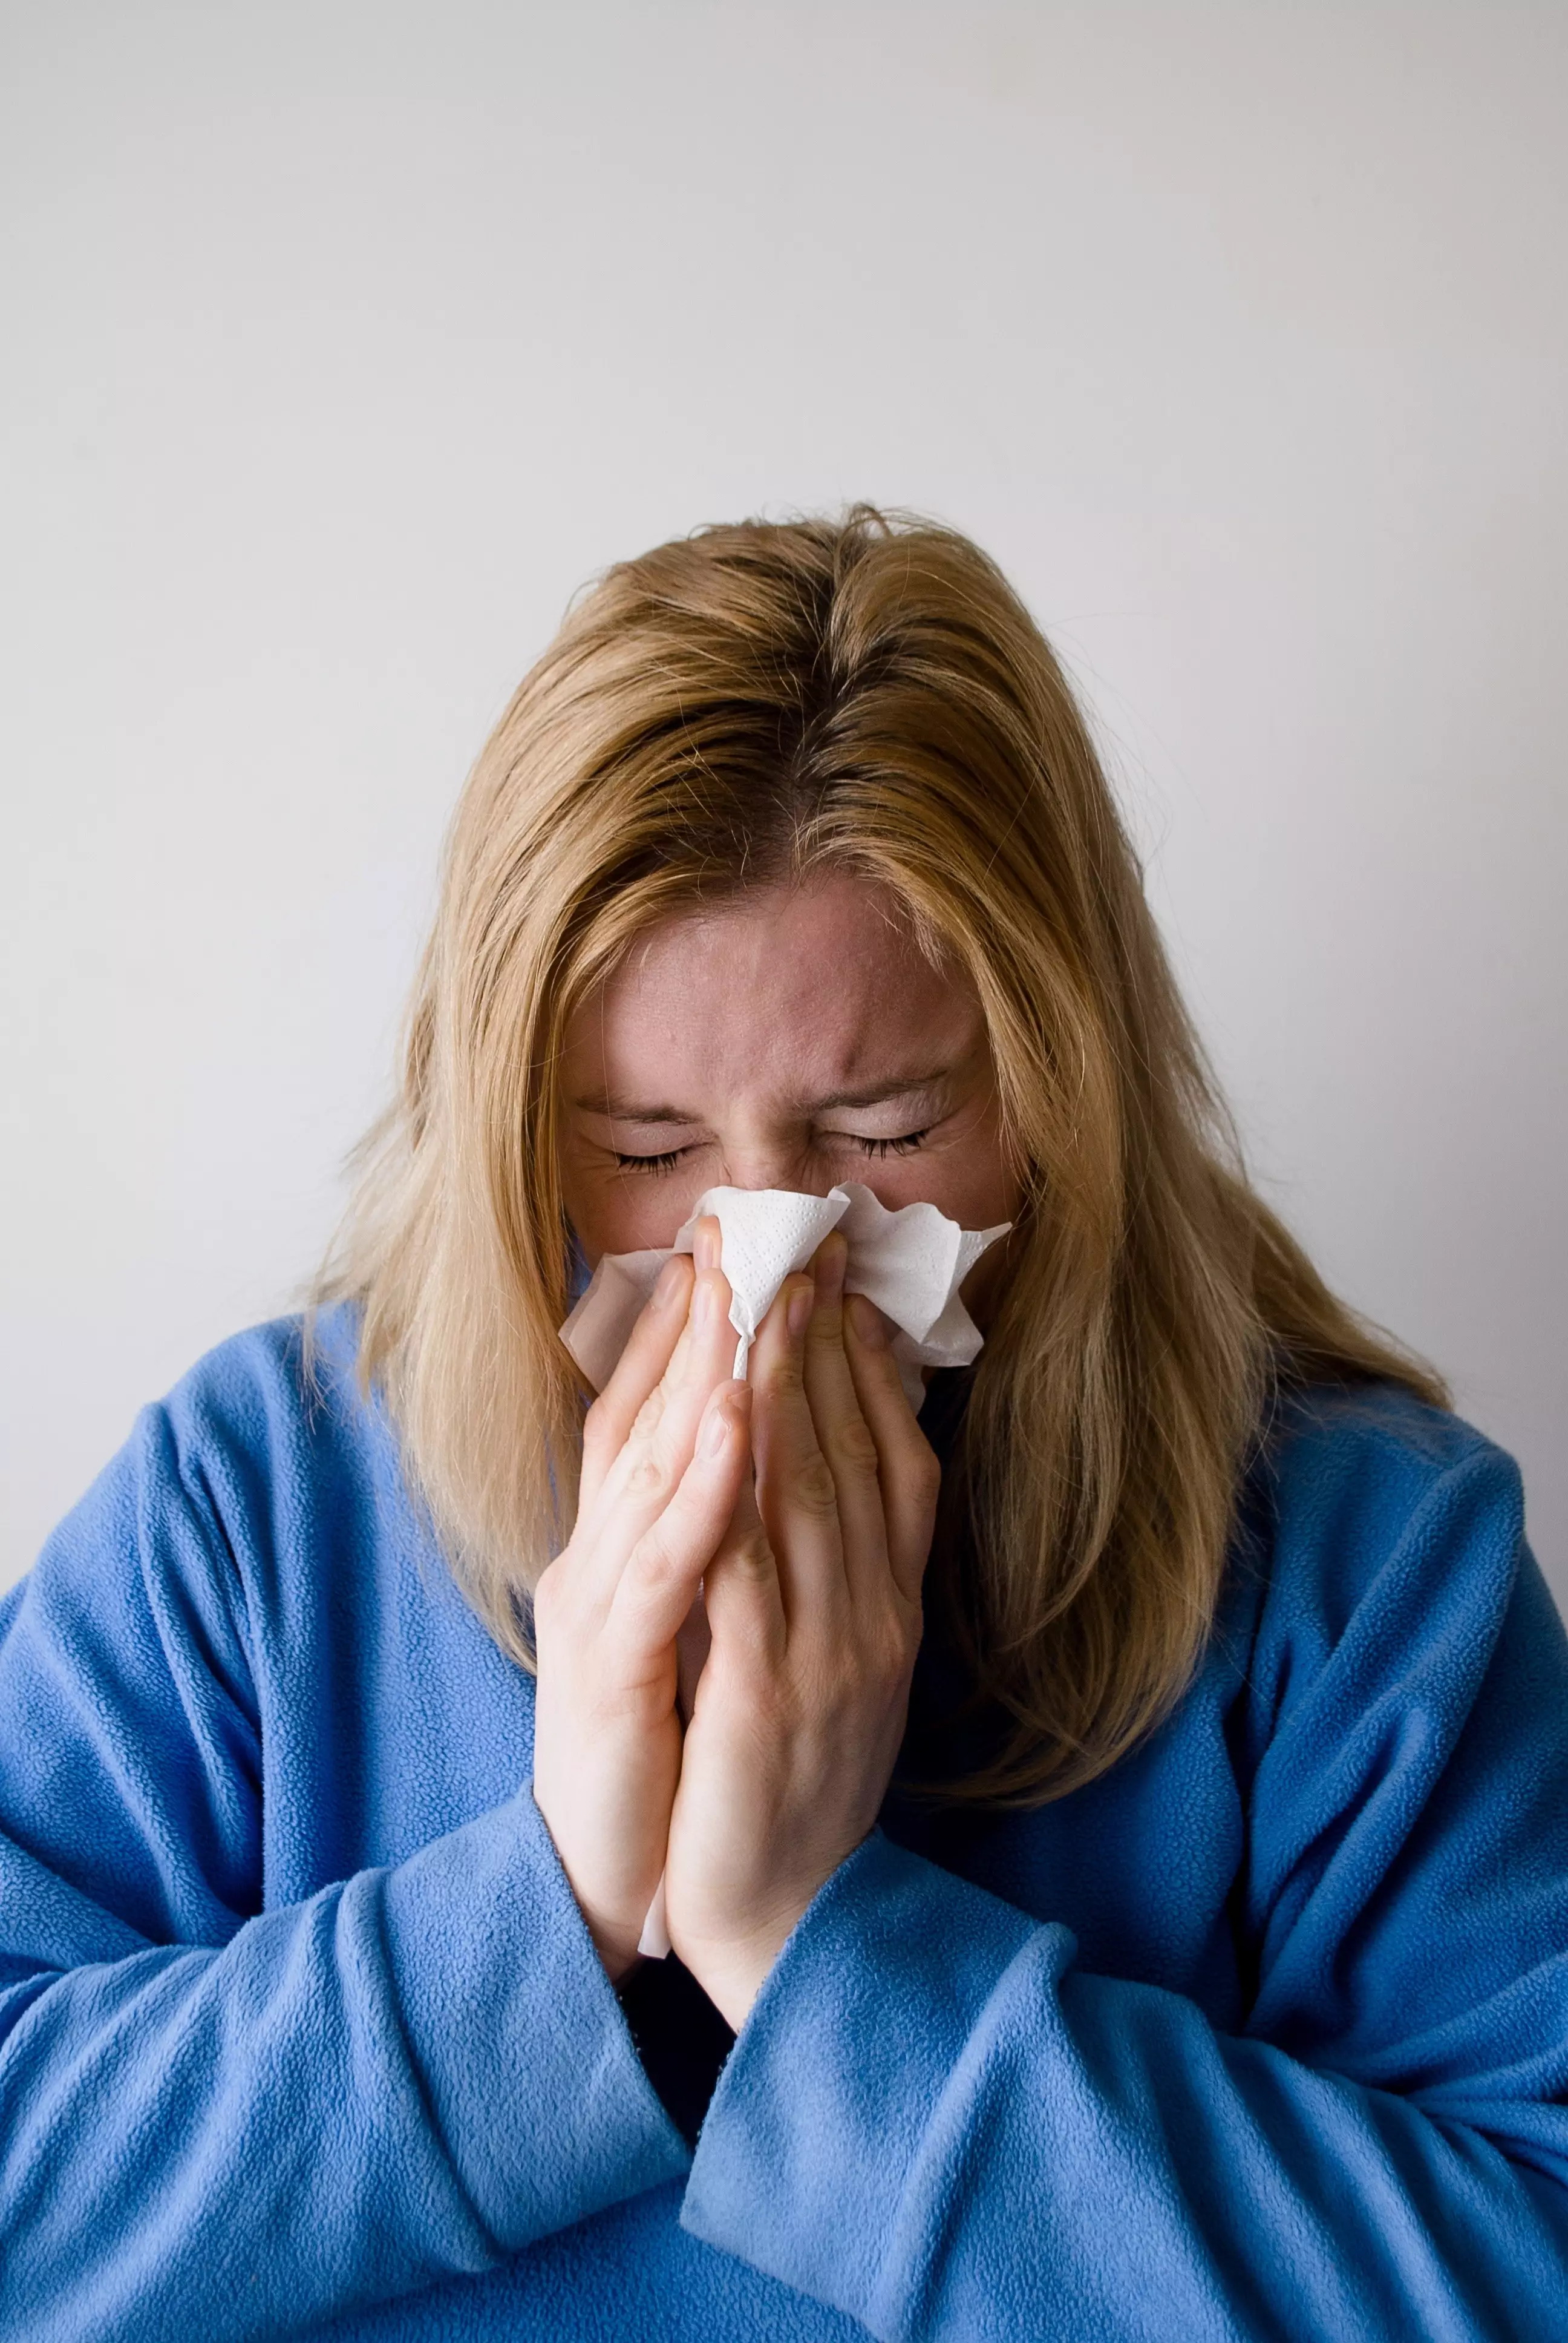 Hay fever can cause runny noses, sneezing and sore eyes (